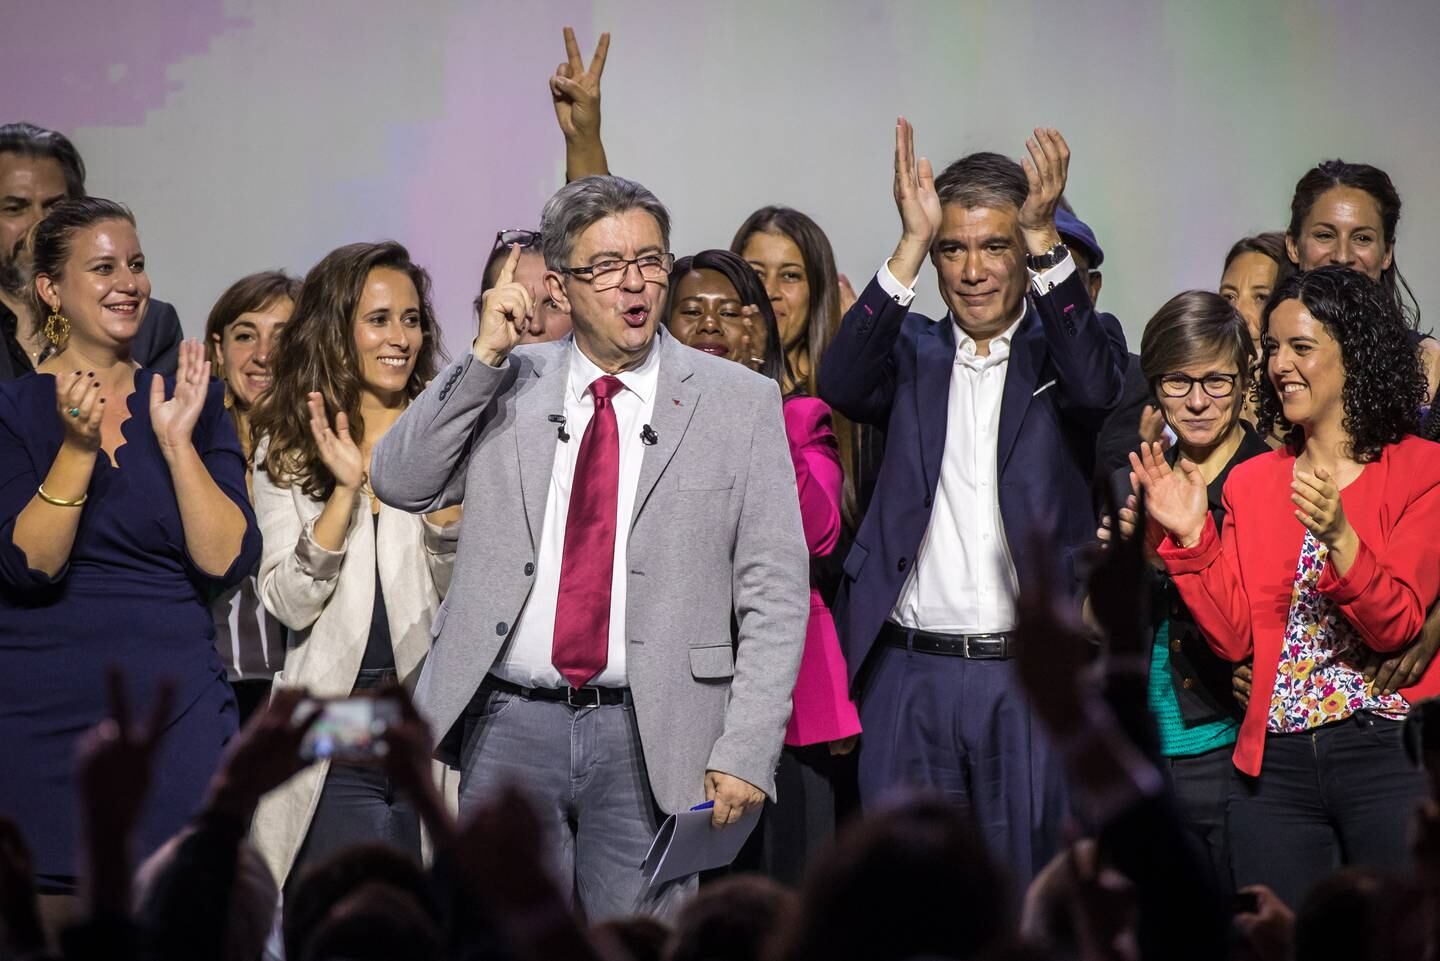 Jean-Luc Melenchon, centre left, has cobbled together myriad parties on the left ahead of the French parliamentary election. EPA